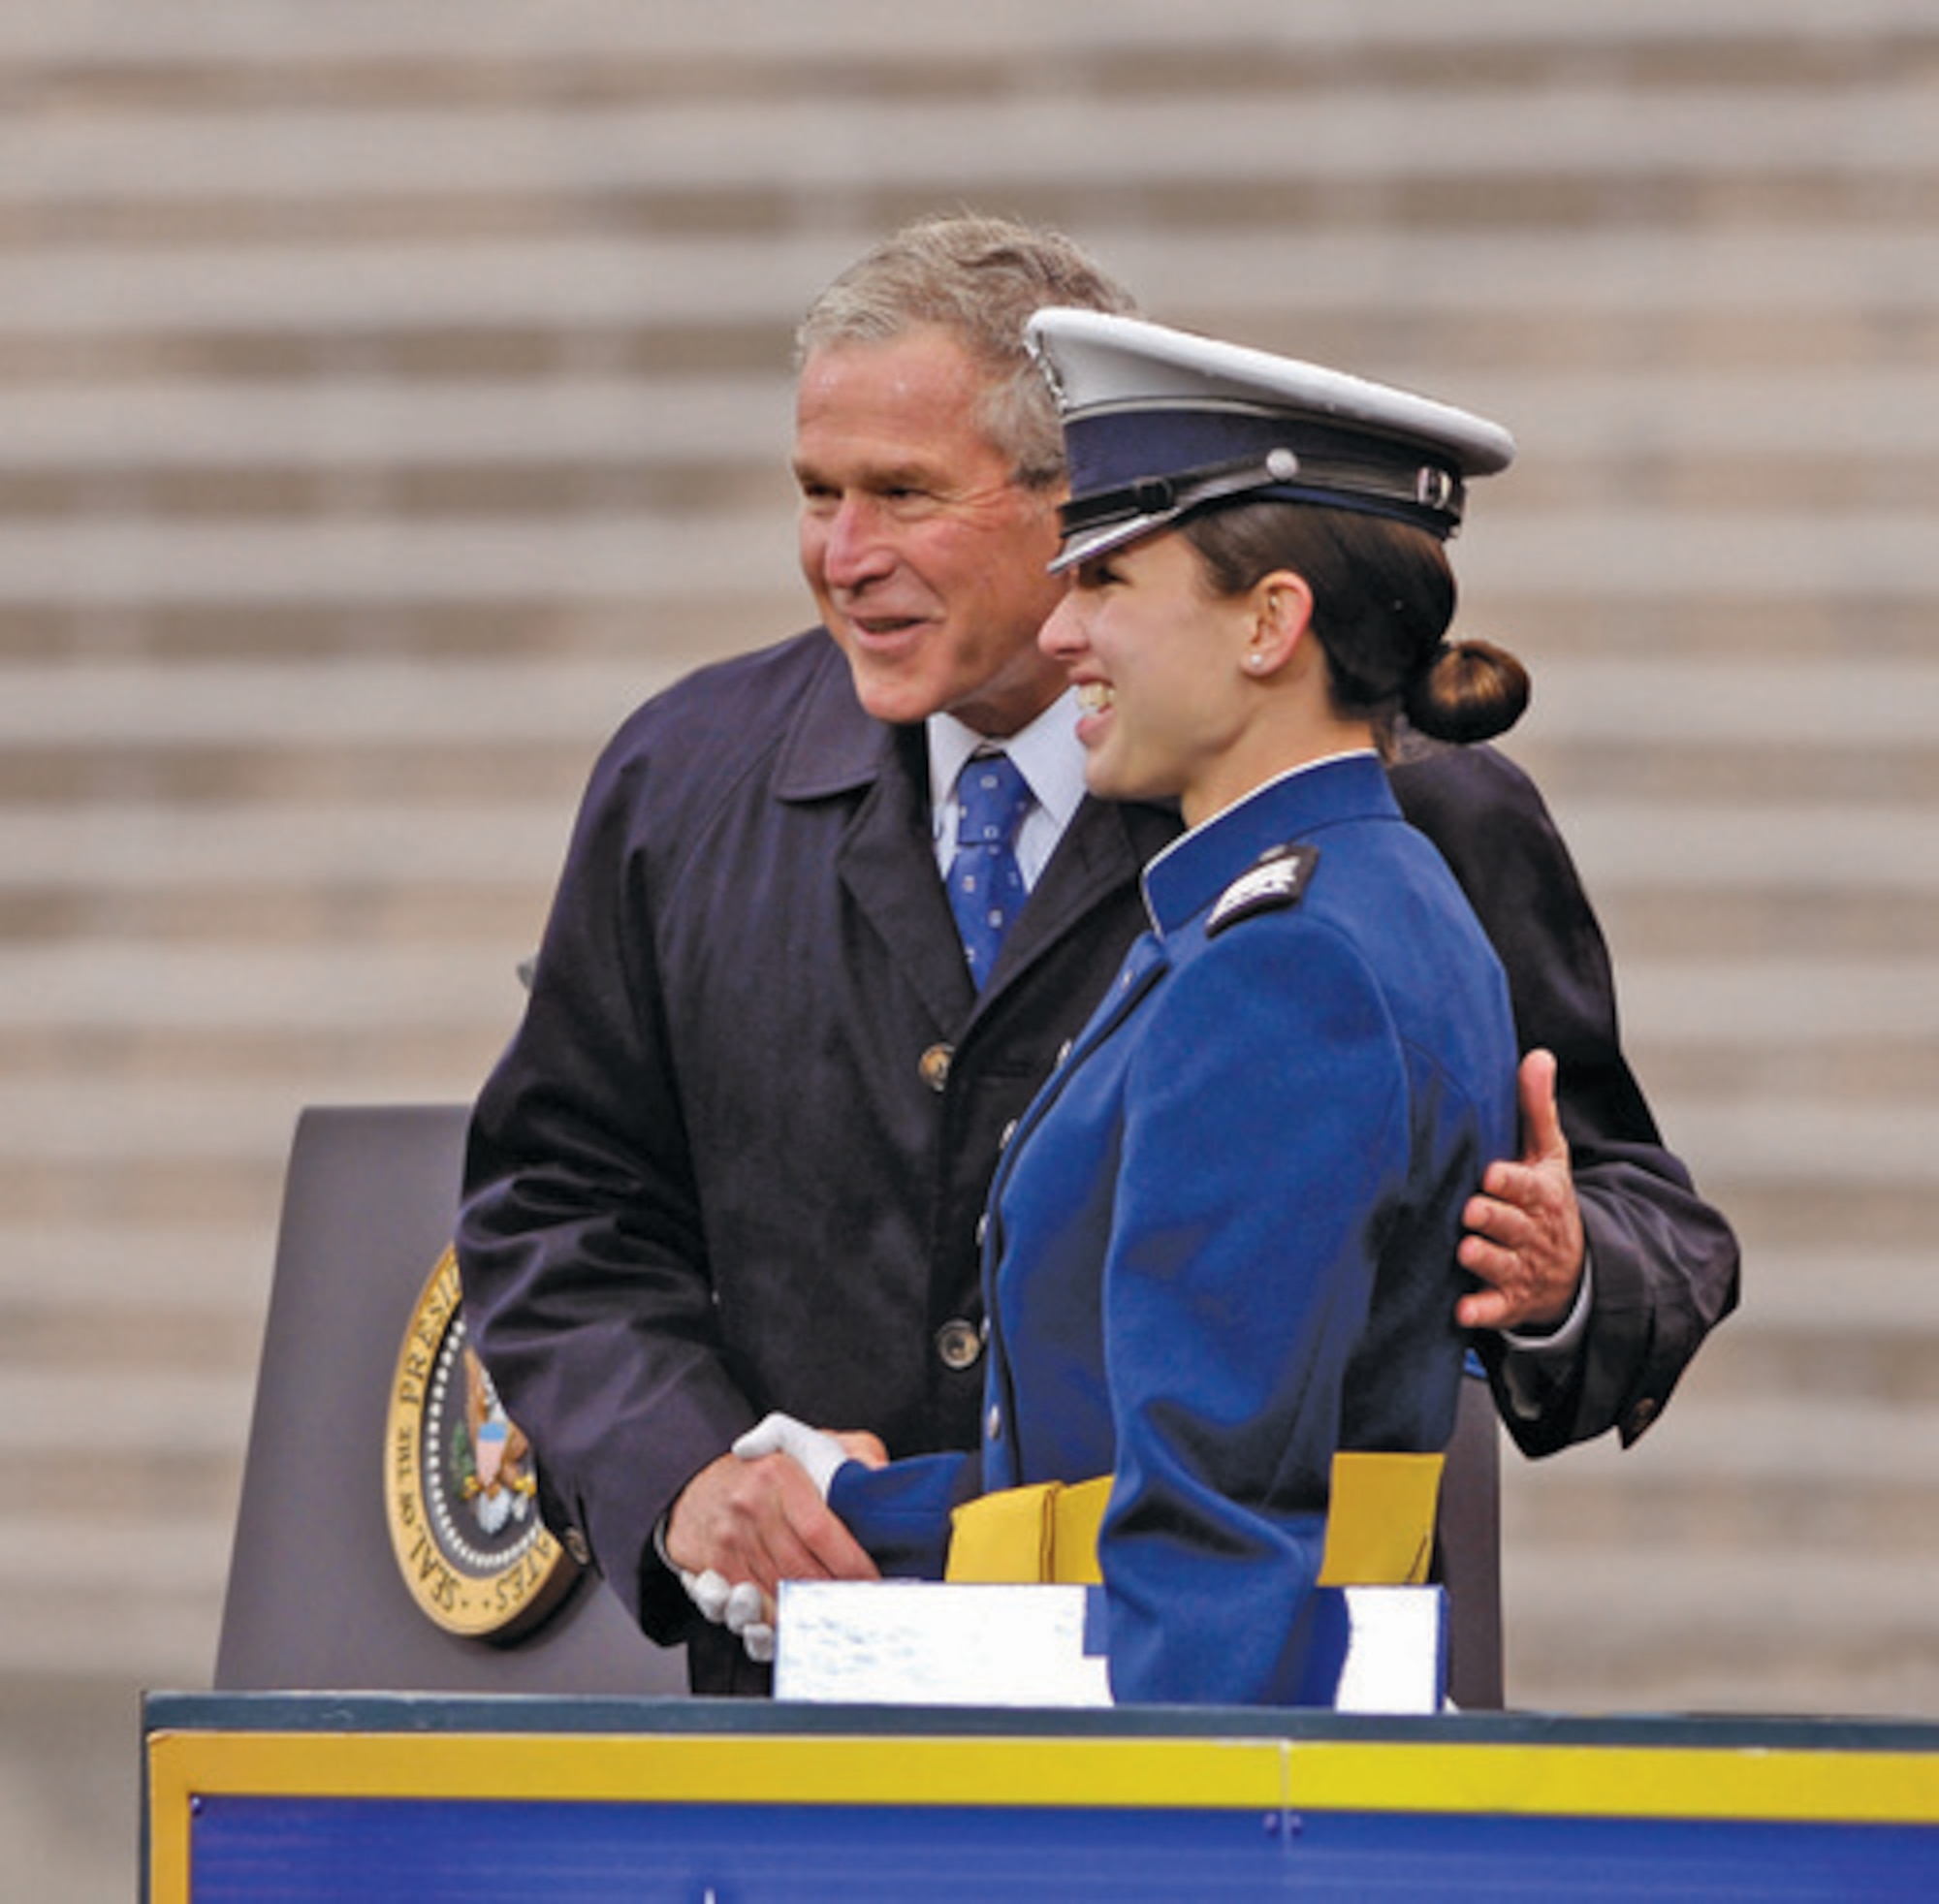 Capt. Hila Levy, an Air Force Reserve Individual Mobilization Augmentee, at her Air Force Academy graduation in 2008. Since this time, Levy has earned two master's degrees at Oxford University as a Rhodes scholar, become a leader in penguin research and is now a doctoral student at Oxford, studying Zoology. She also serves her country as a Air Force Reserve Individual Mobilization Augmentee. She is currently serving as the division chief of training at the Joint Reserve Intelligence Support Element, Royal Air Force Molesworth, United Kingdom.